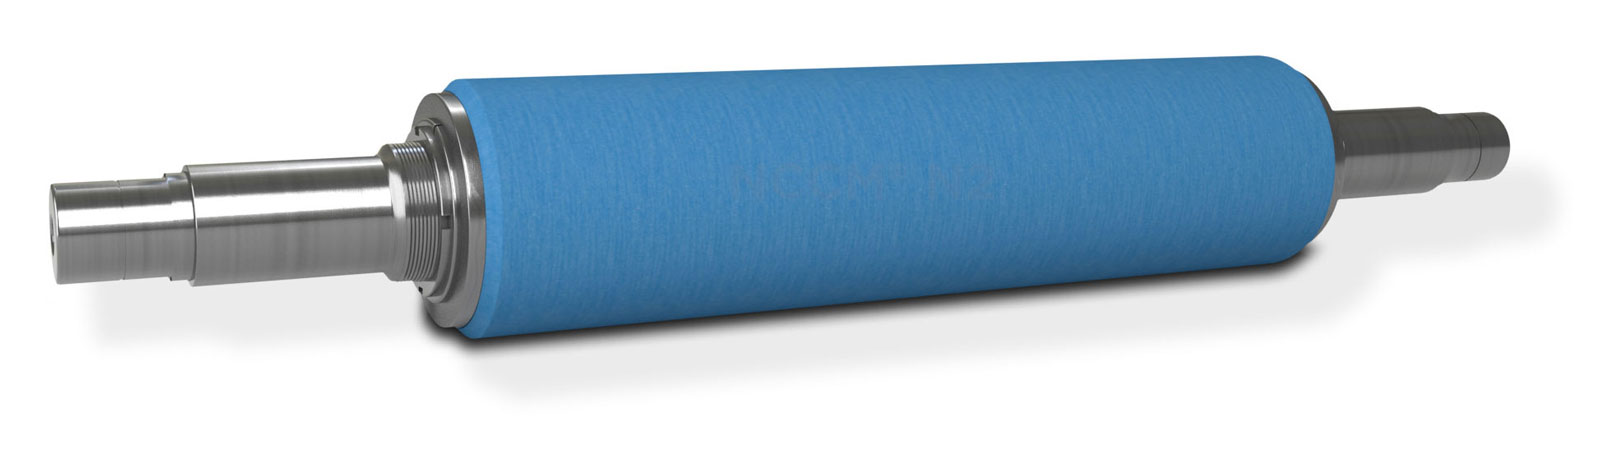 Perspective view of the NCCM<sup>®</sup> N2 nonwoven roll on a metal shaft